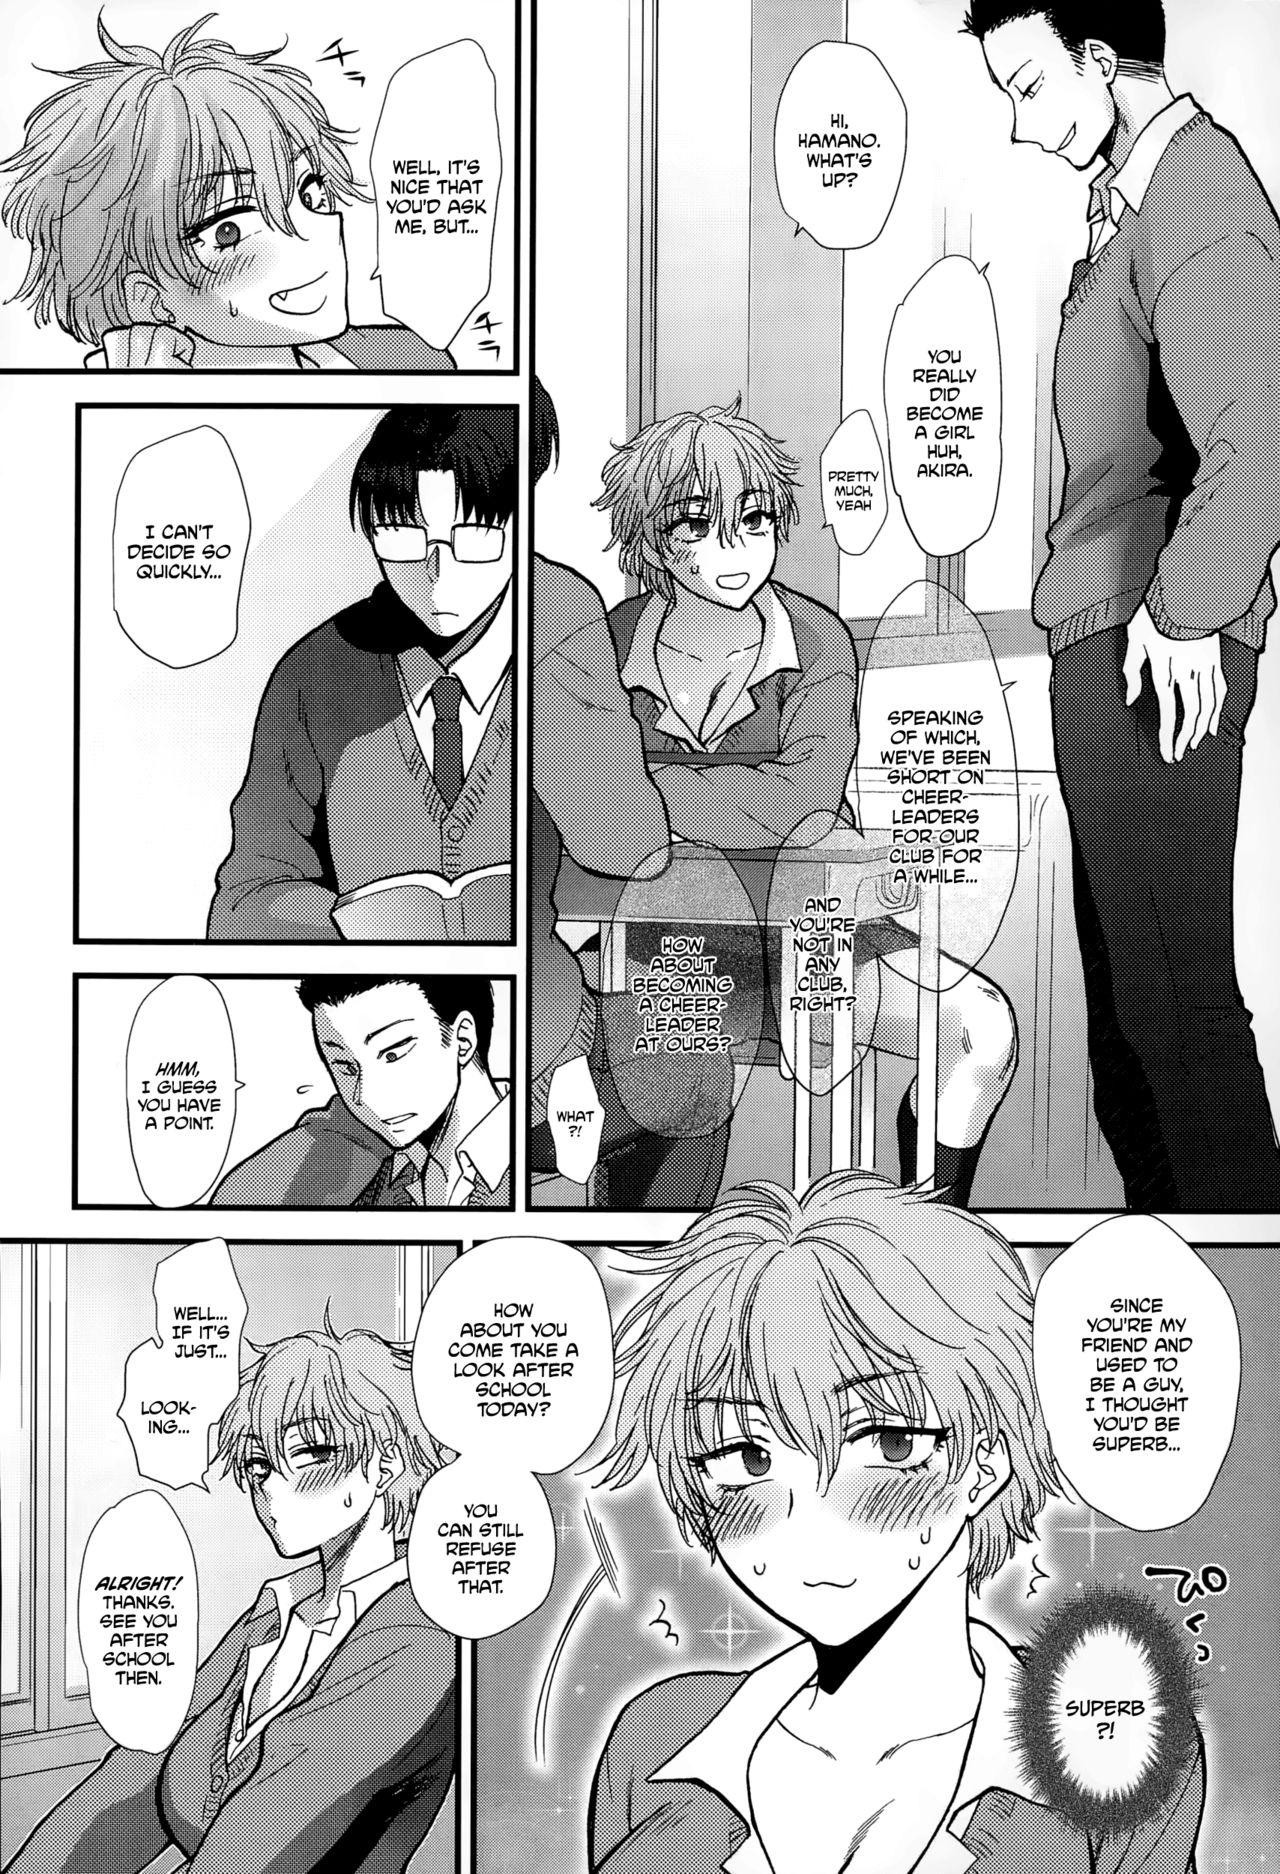 Price Shinyuu Affection - Best Friend Affection Babes - Page 6